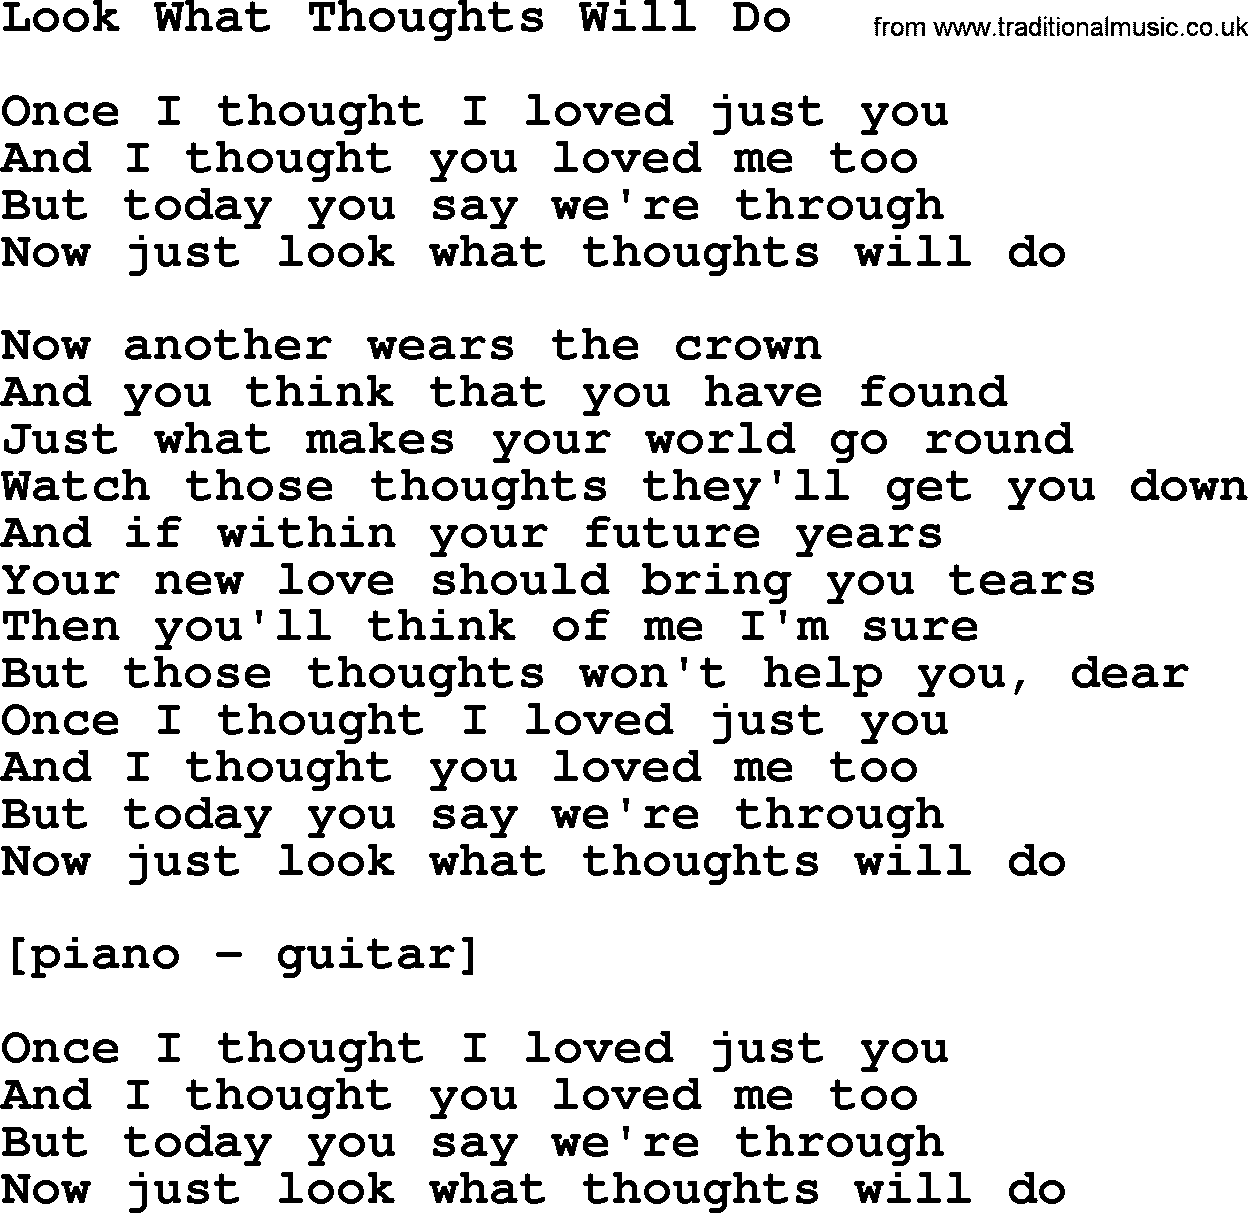 Willie Nelson song: Look What Thoughts Will Do lyrics